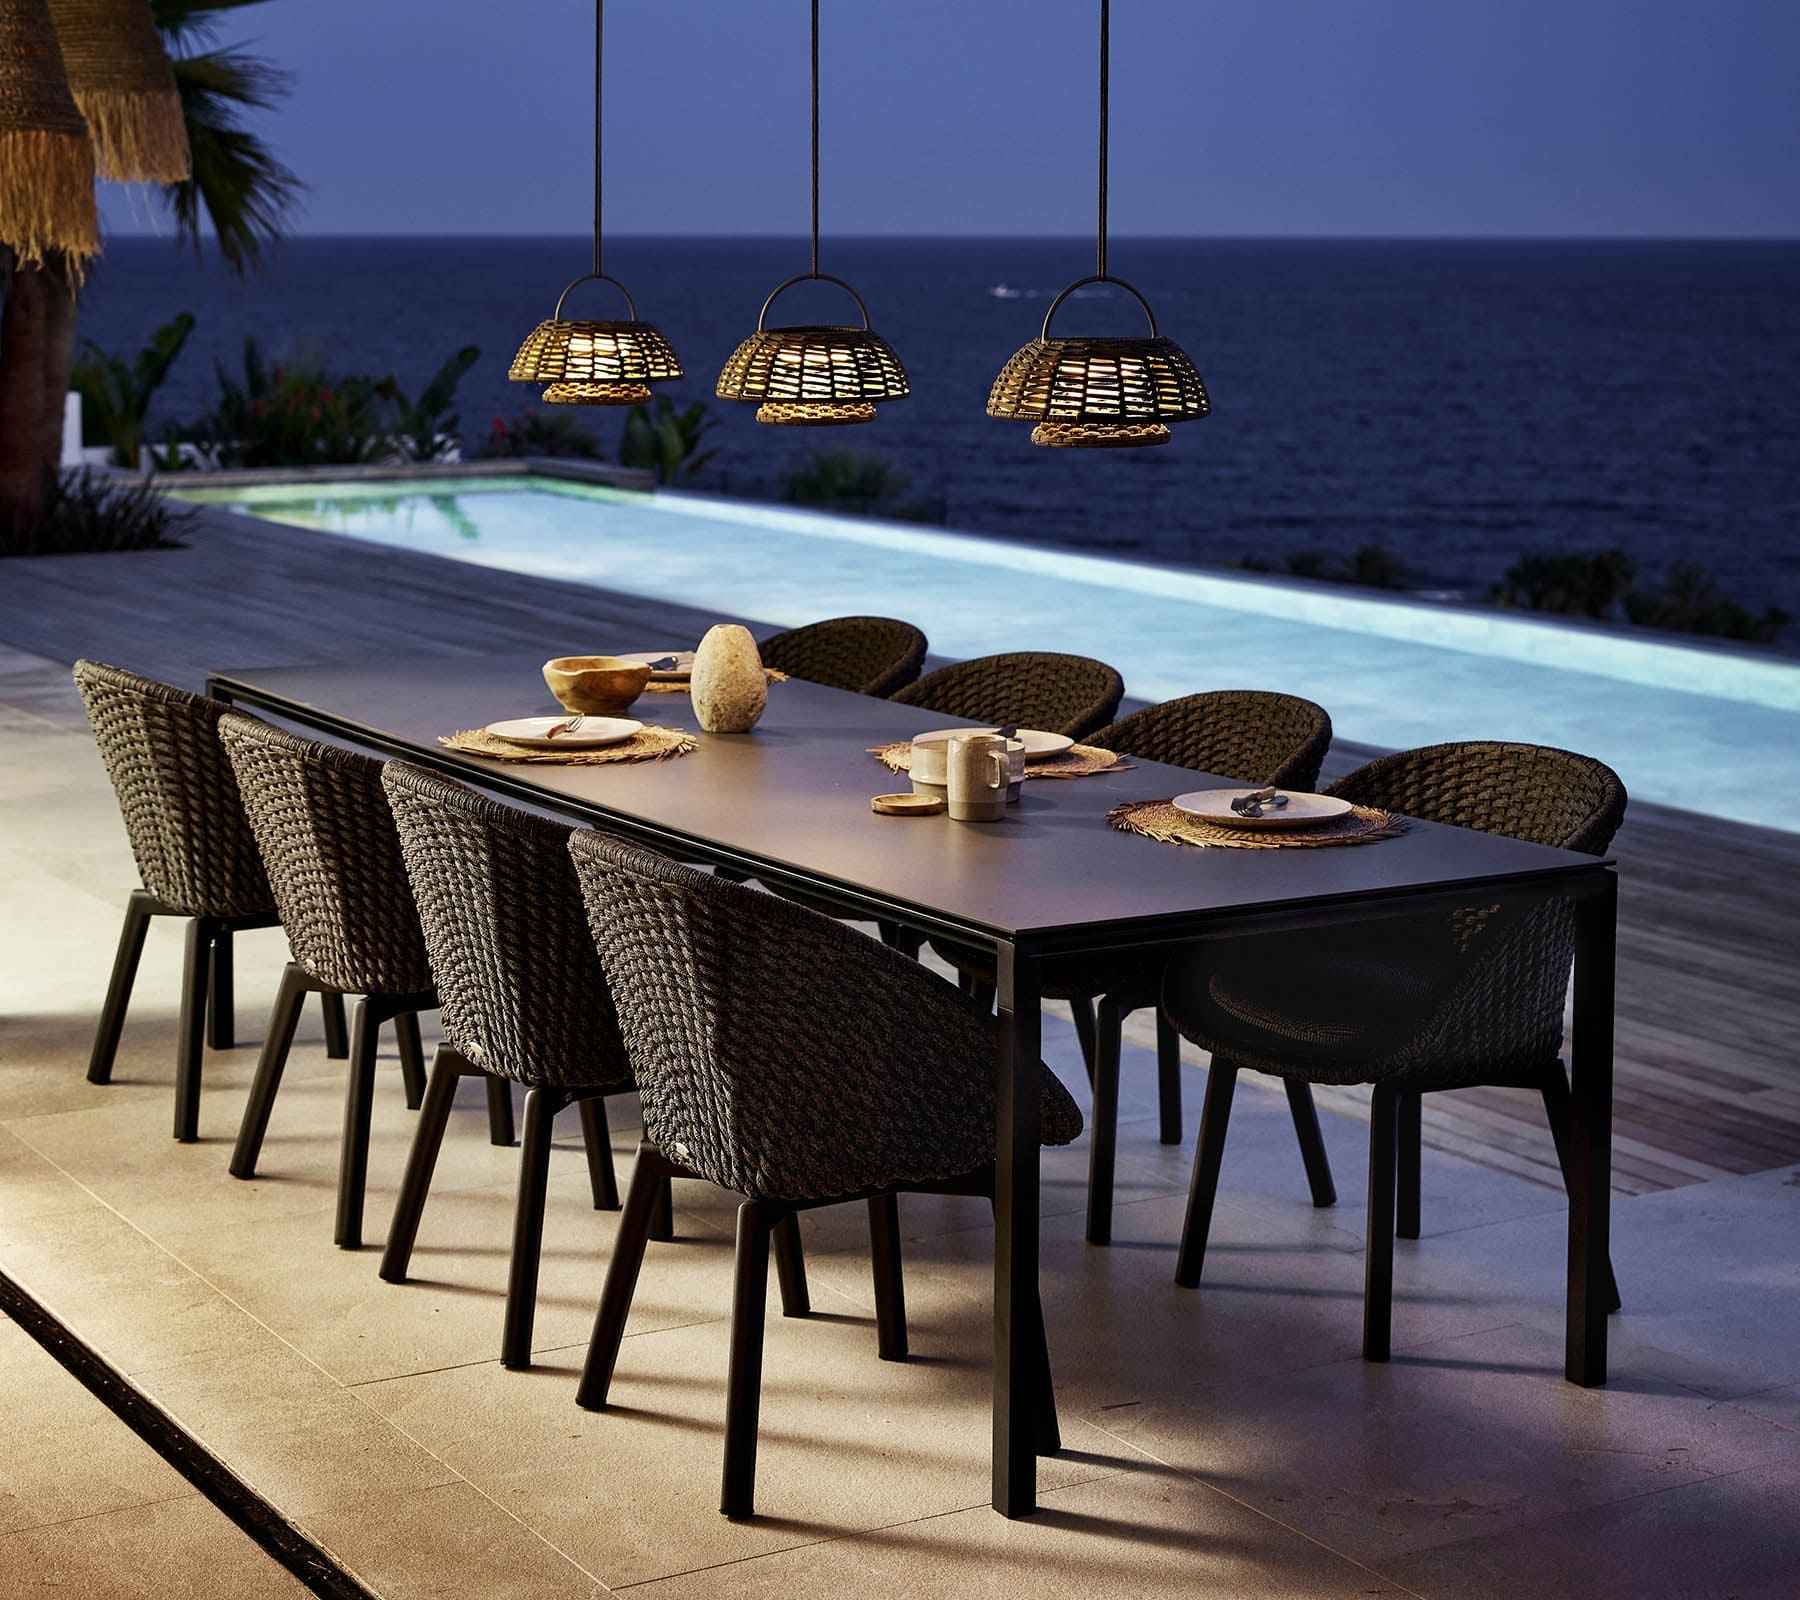 Boxhill's Illusion Outdoor Hanging Lamp w/ Stand and Led Lamp lifestyle image with dining table and dining chairs near poolside